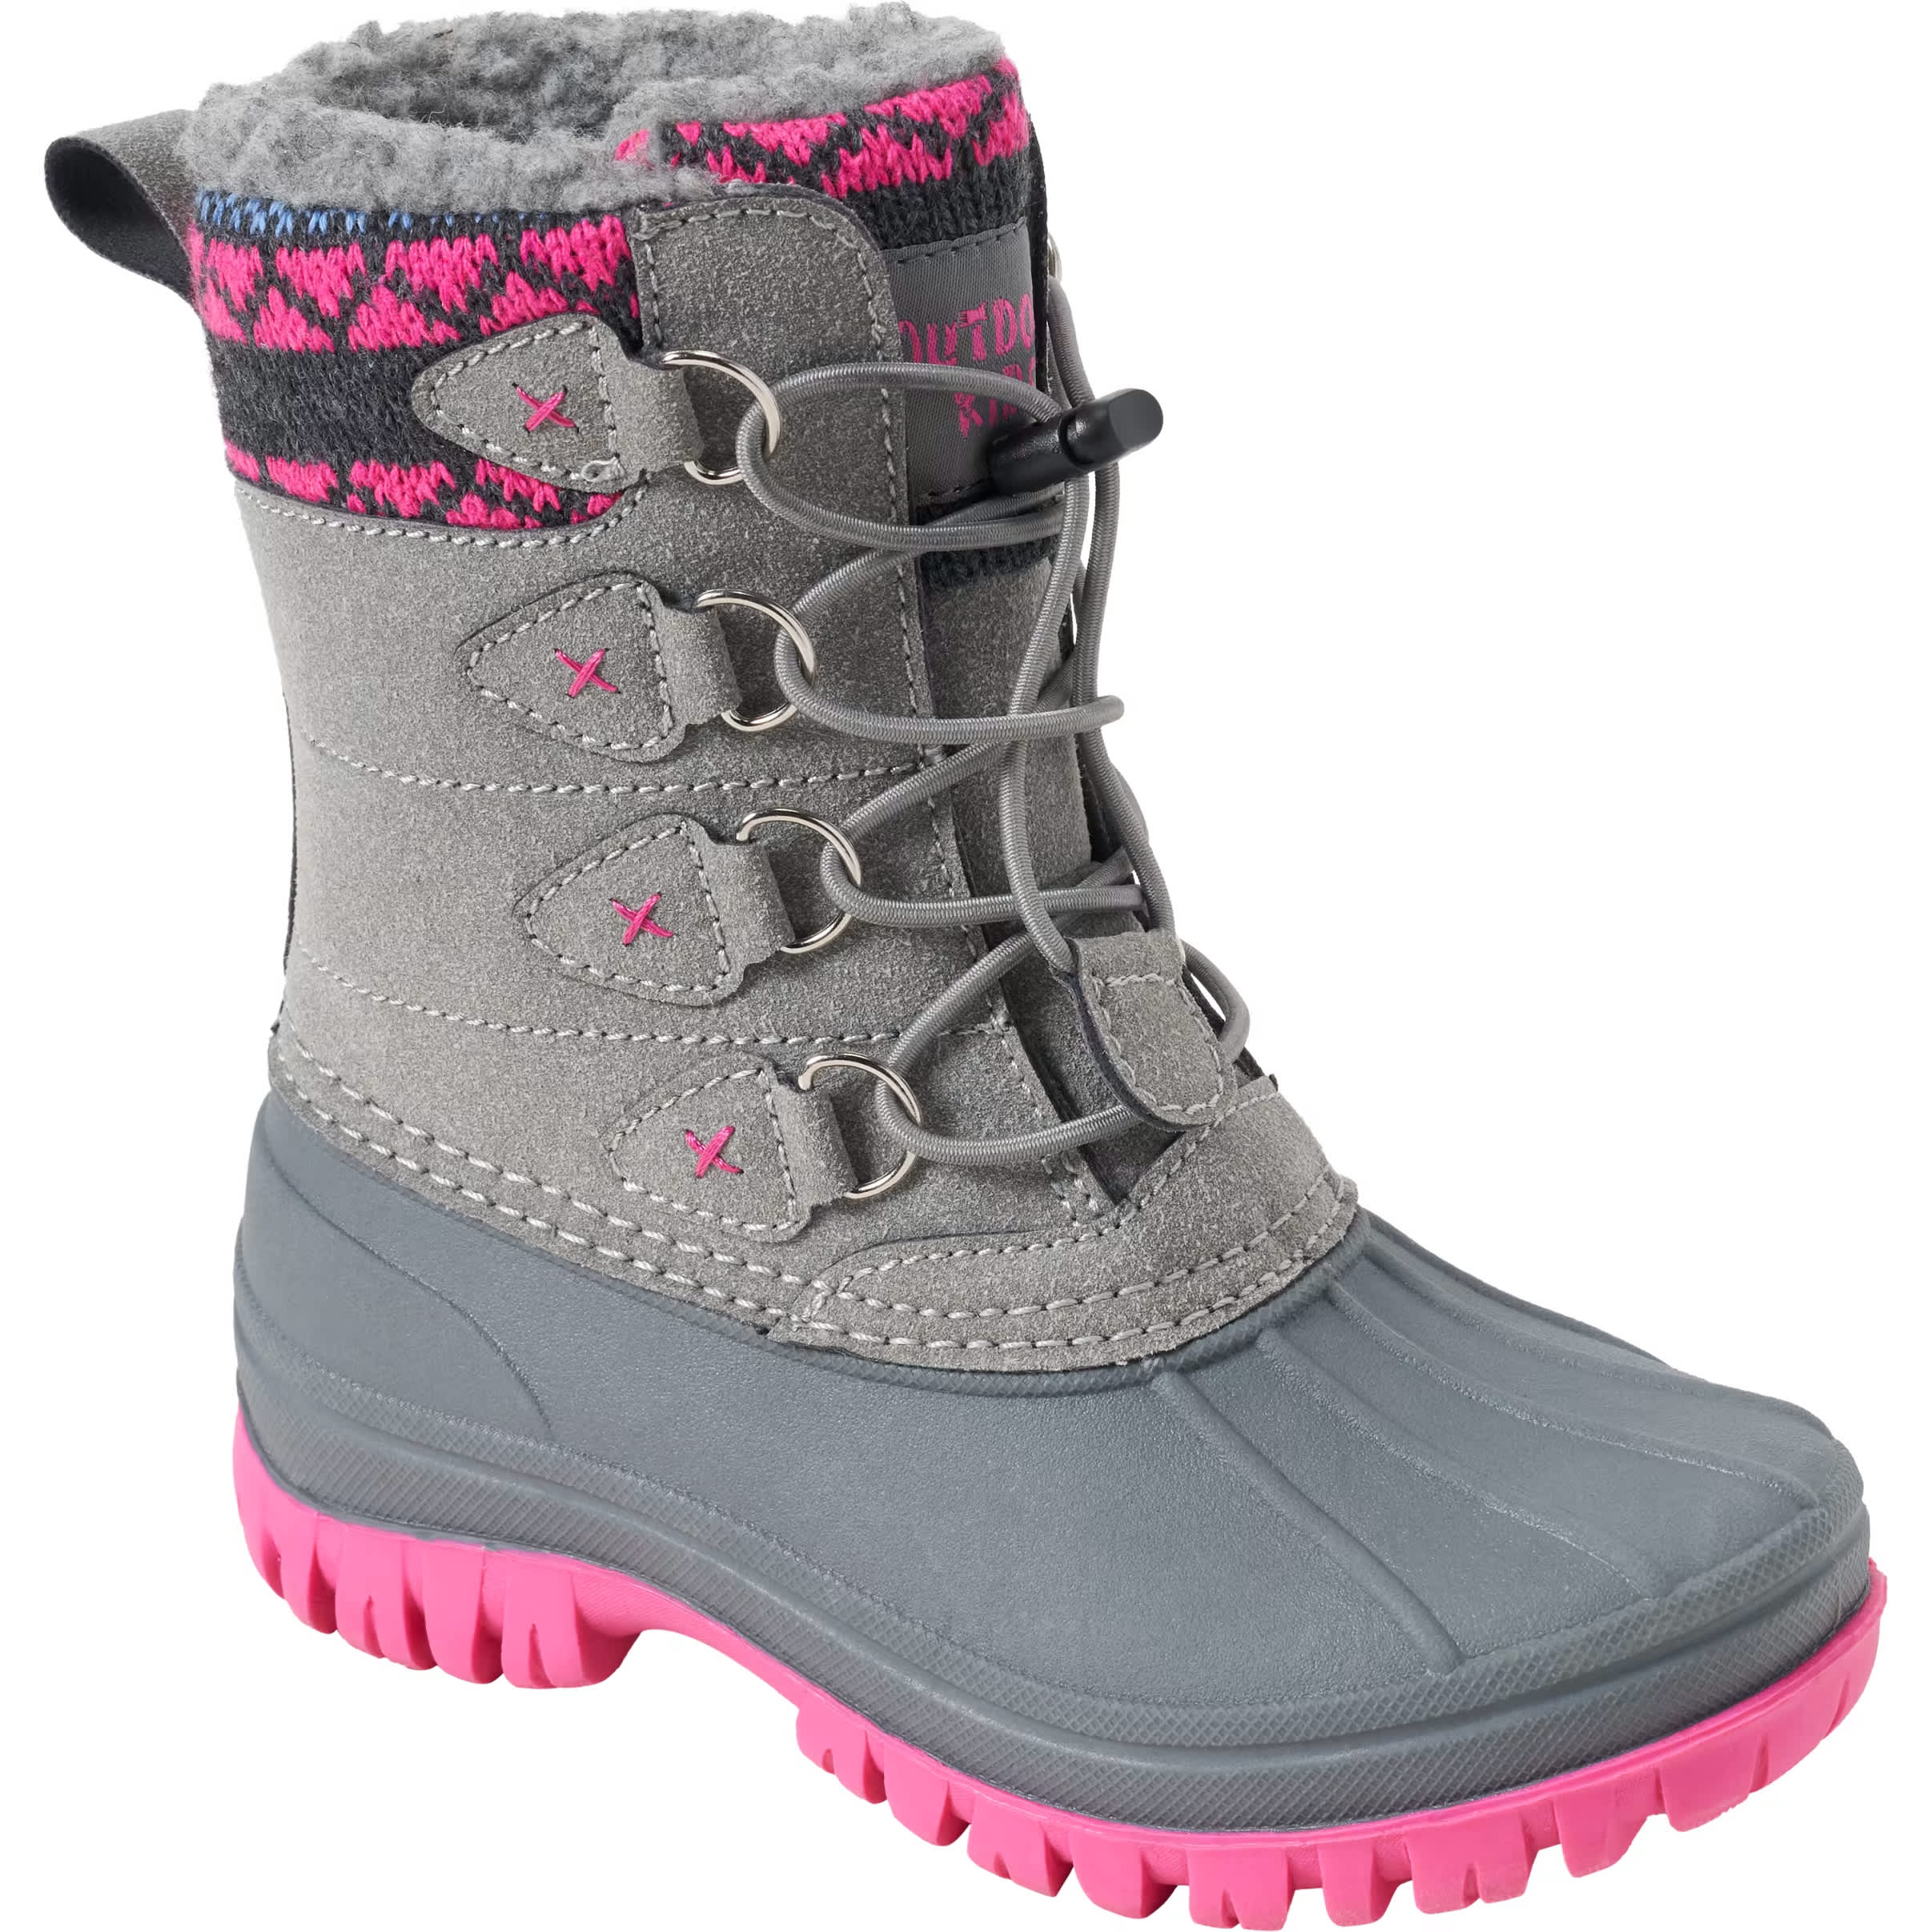 Outdoor Kids® Children’s Lucerne Insulated Pac Boots